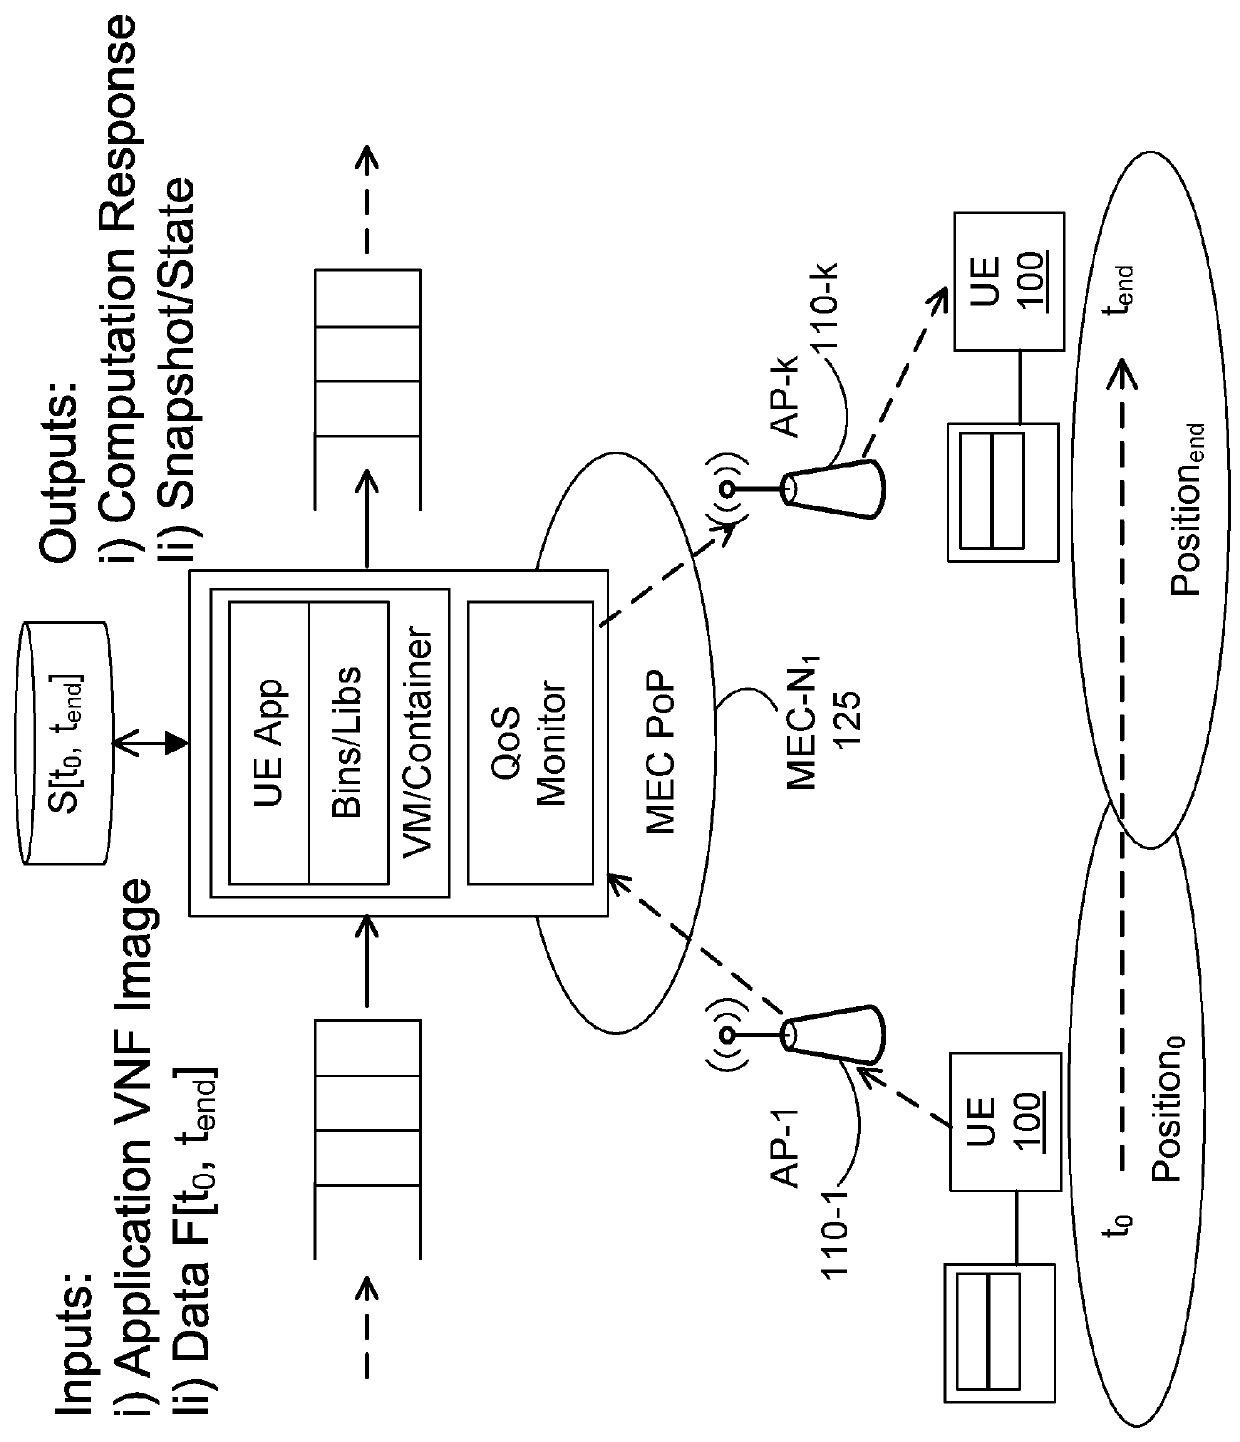 Virtual Network State Management in Mobile Edge Computing